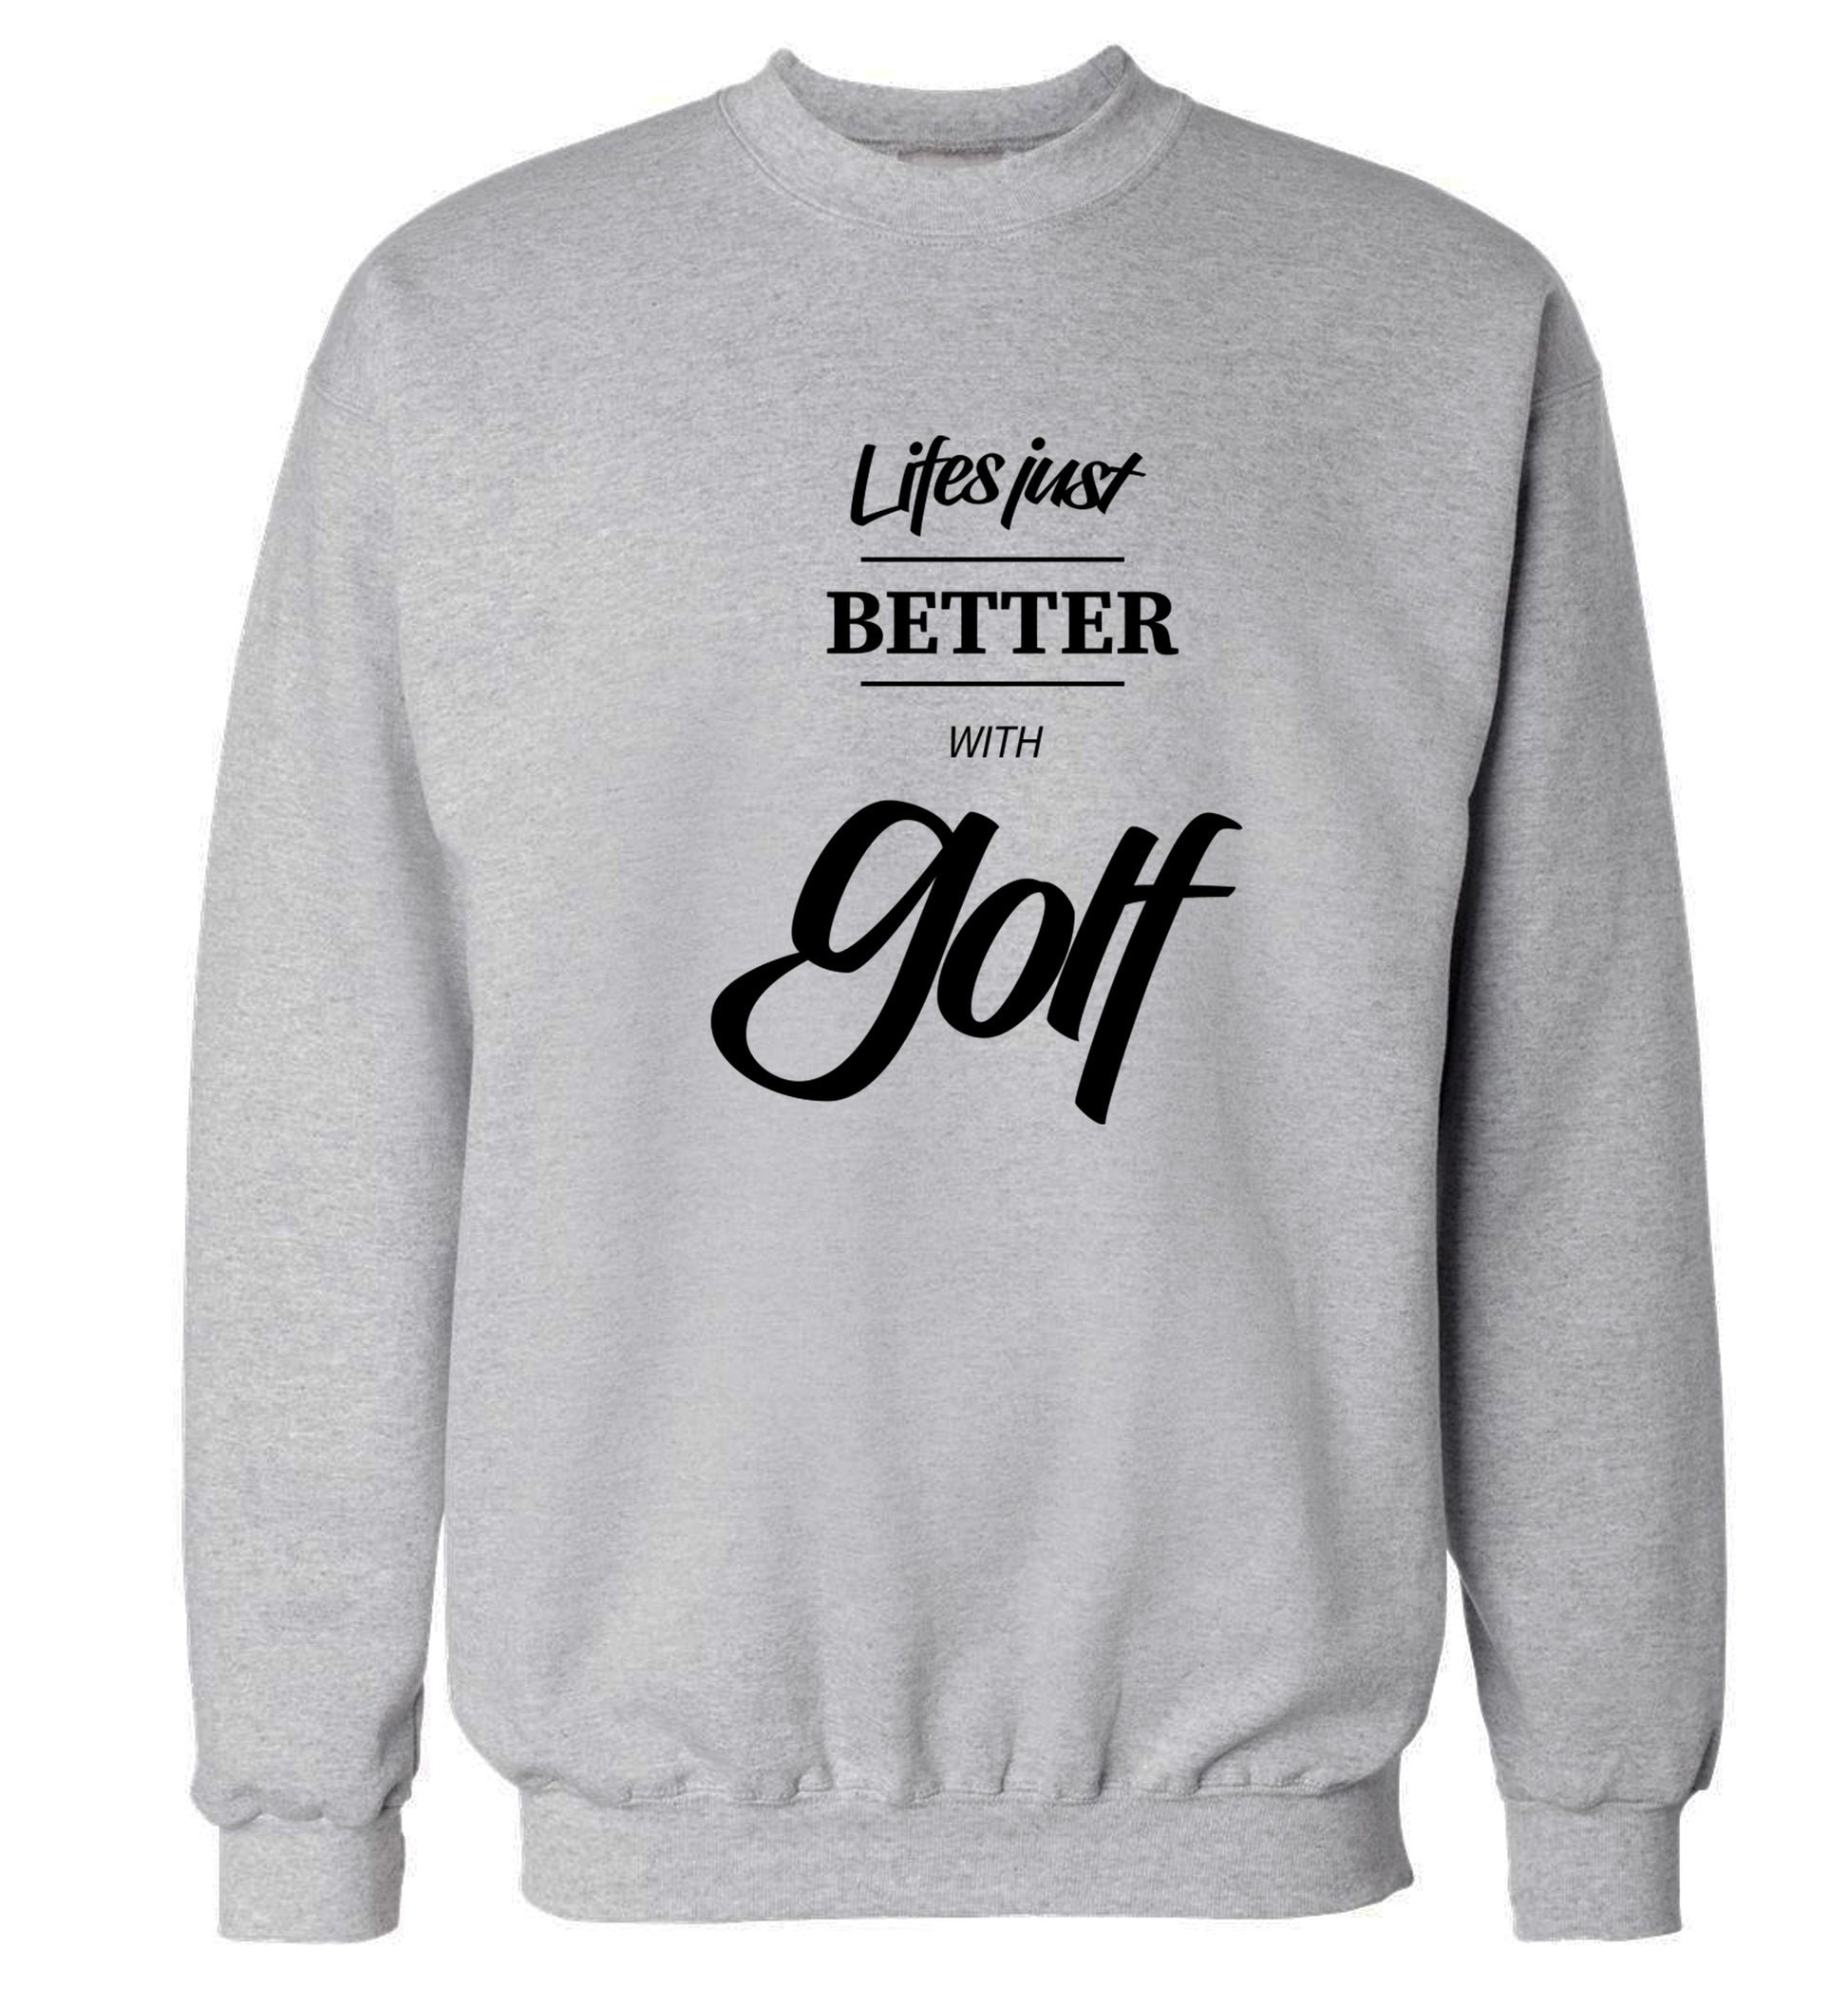 Life is better with golf Adult's unisex grey Sweater 2XL